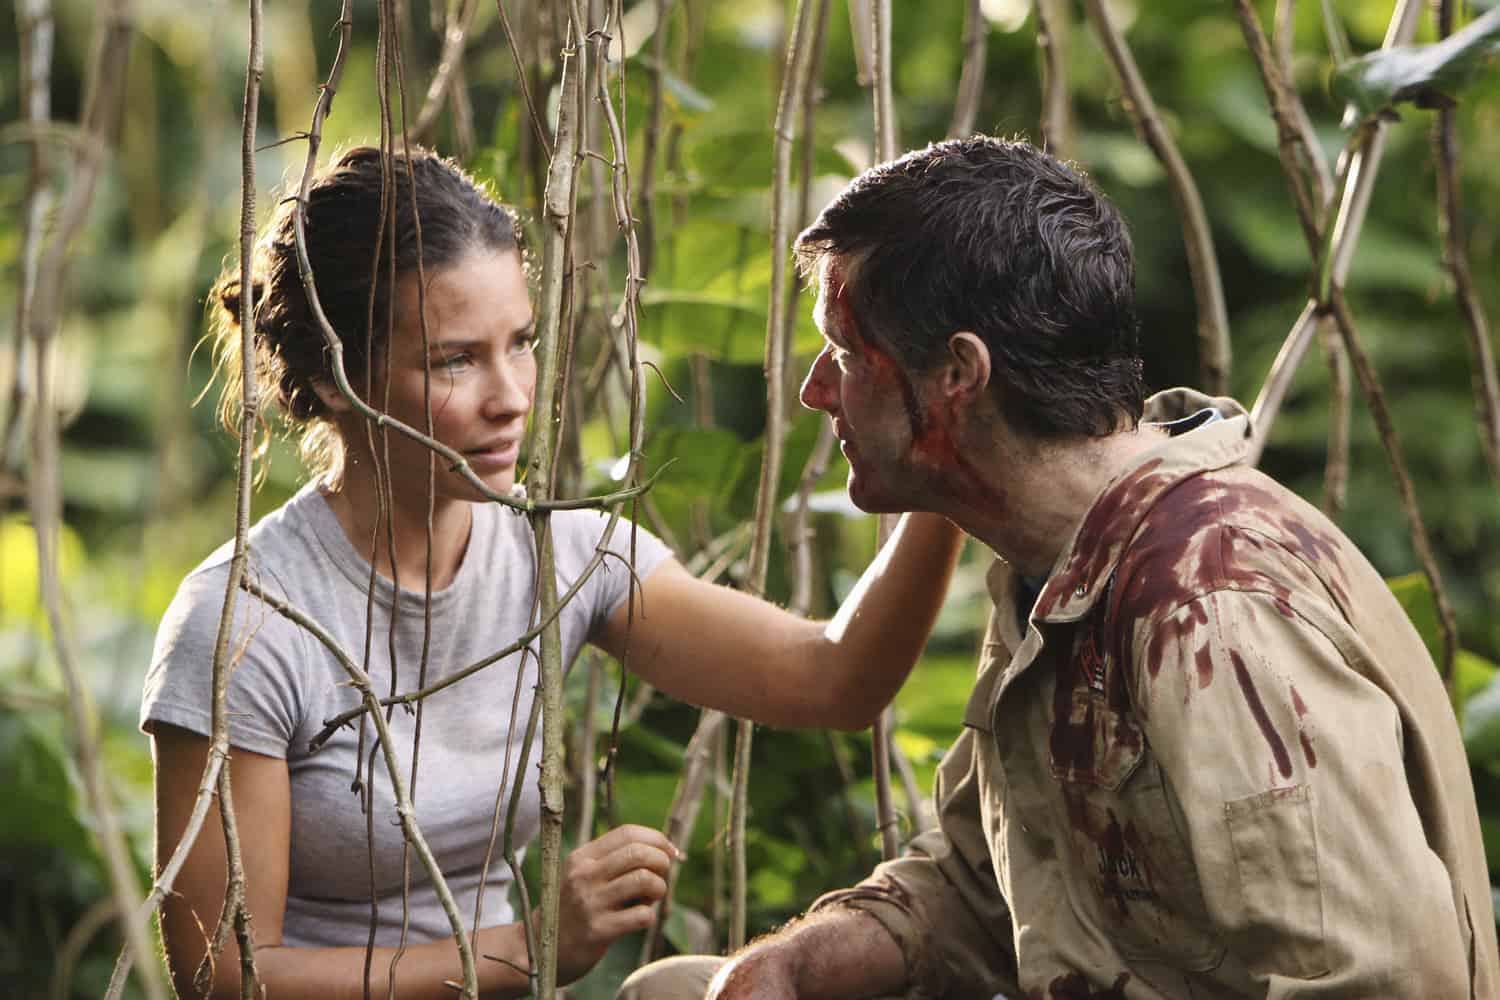 A woman touching a man’s face through vines in the jungle in this image from Bad Robot.